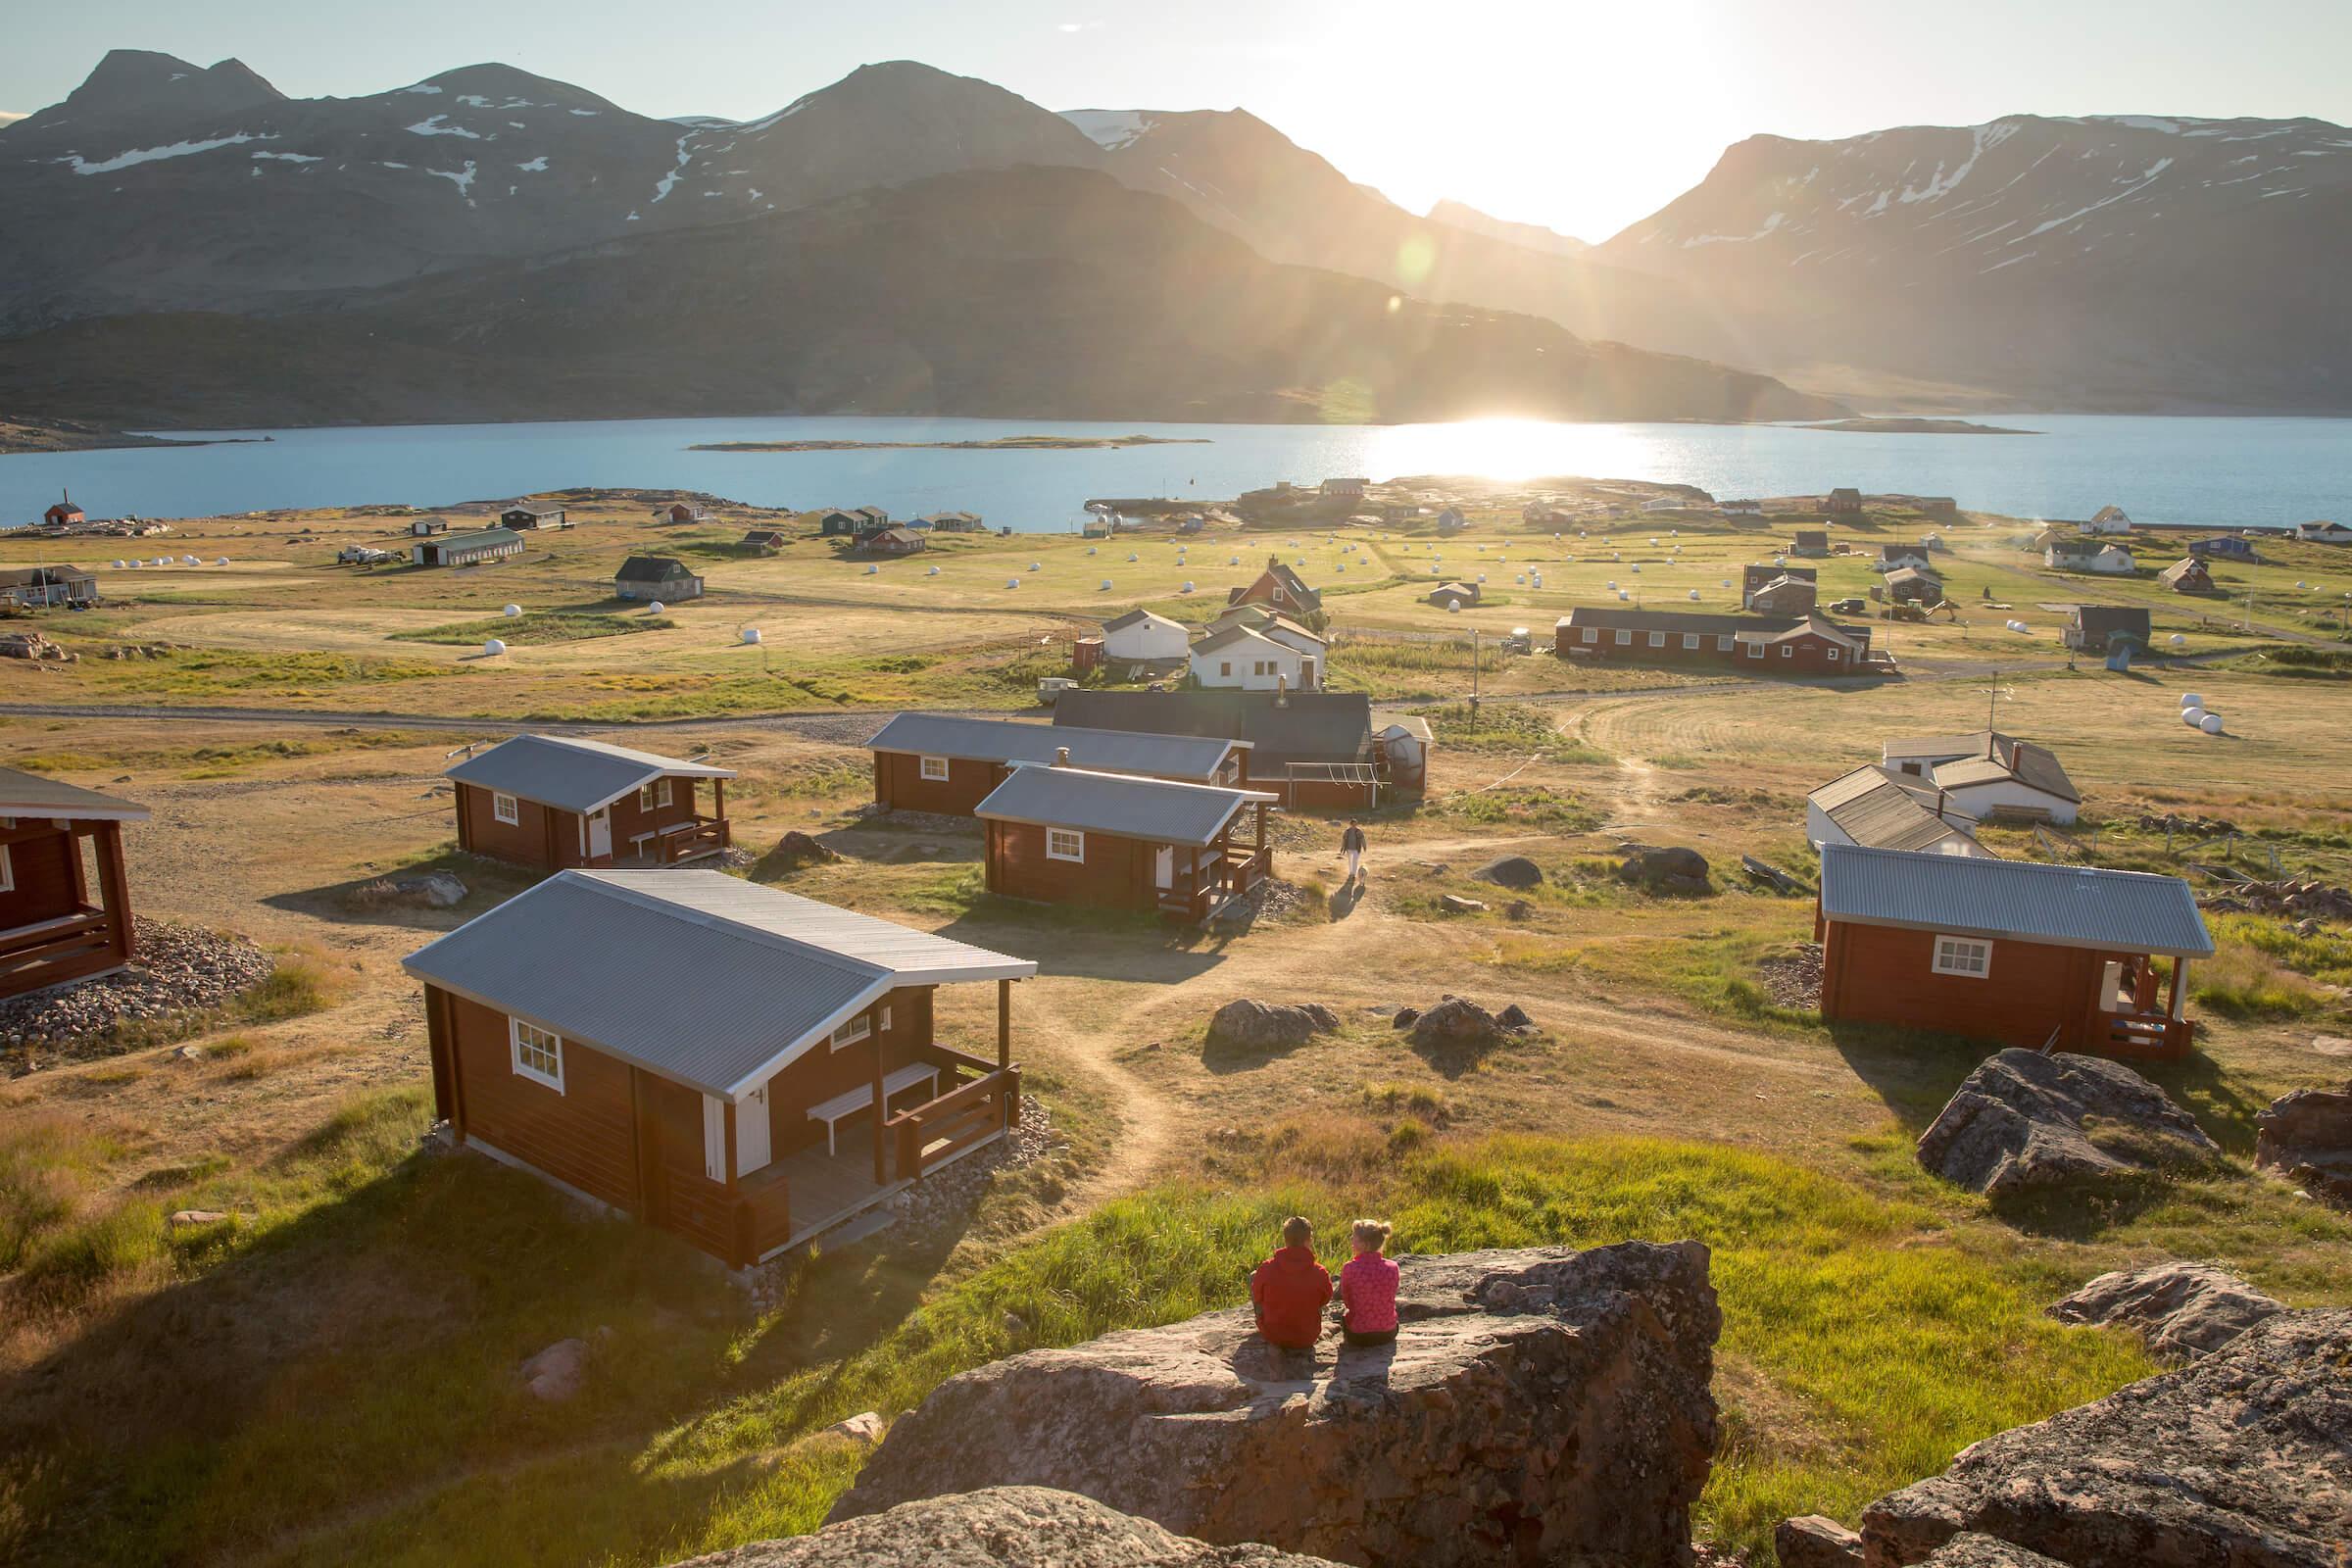 Two guests enjoying the sunset at the Blue Ice hut accommodation in Igaliku in South Greenland. Photo by Mads Pihl.